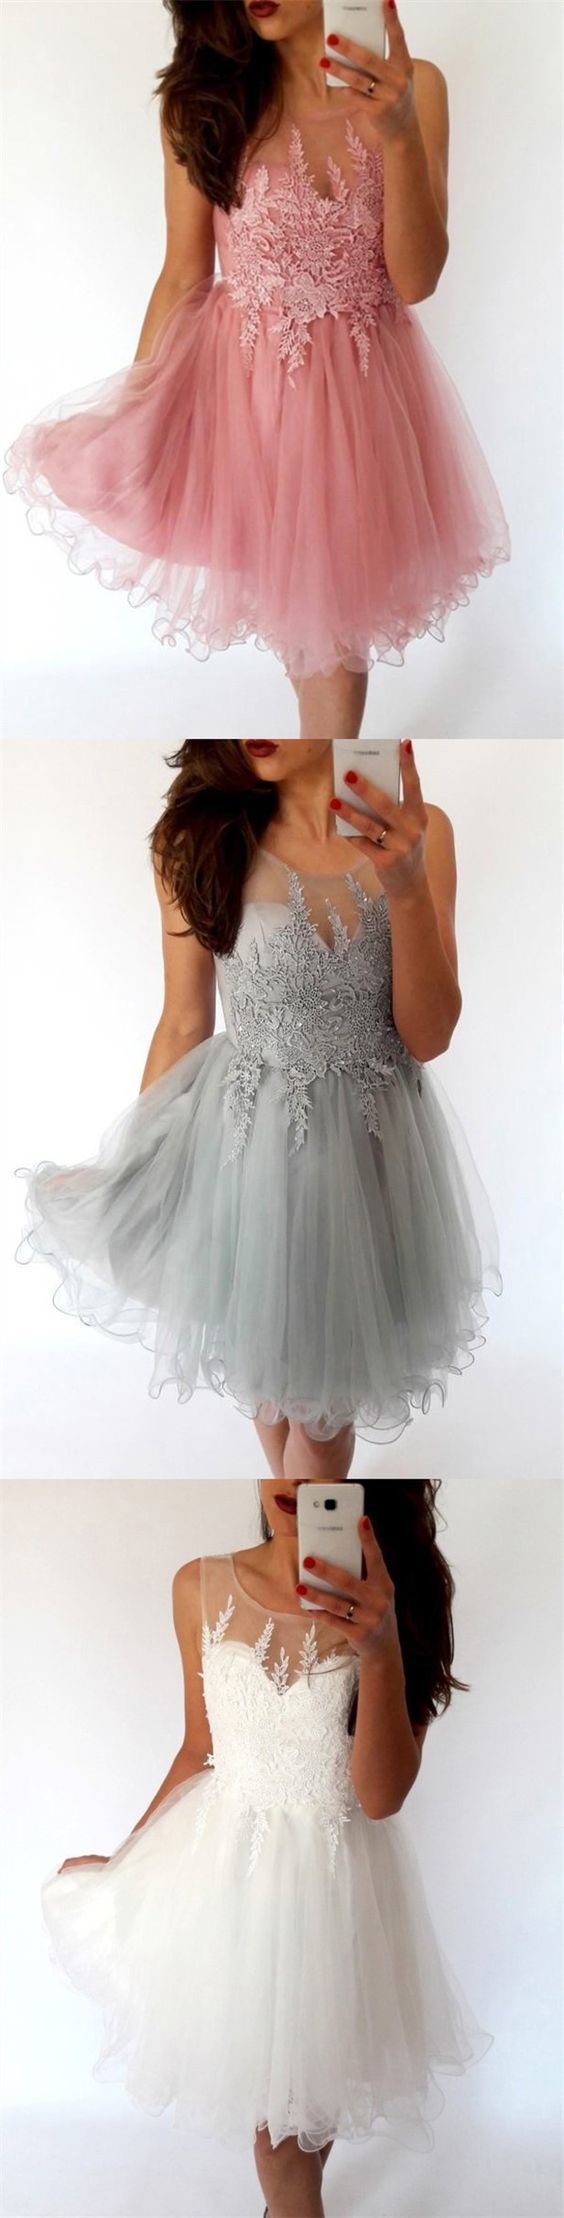 A-Line Illusion Neck Knee-Length Homecoming Dress with Appliques cg777